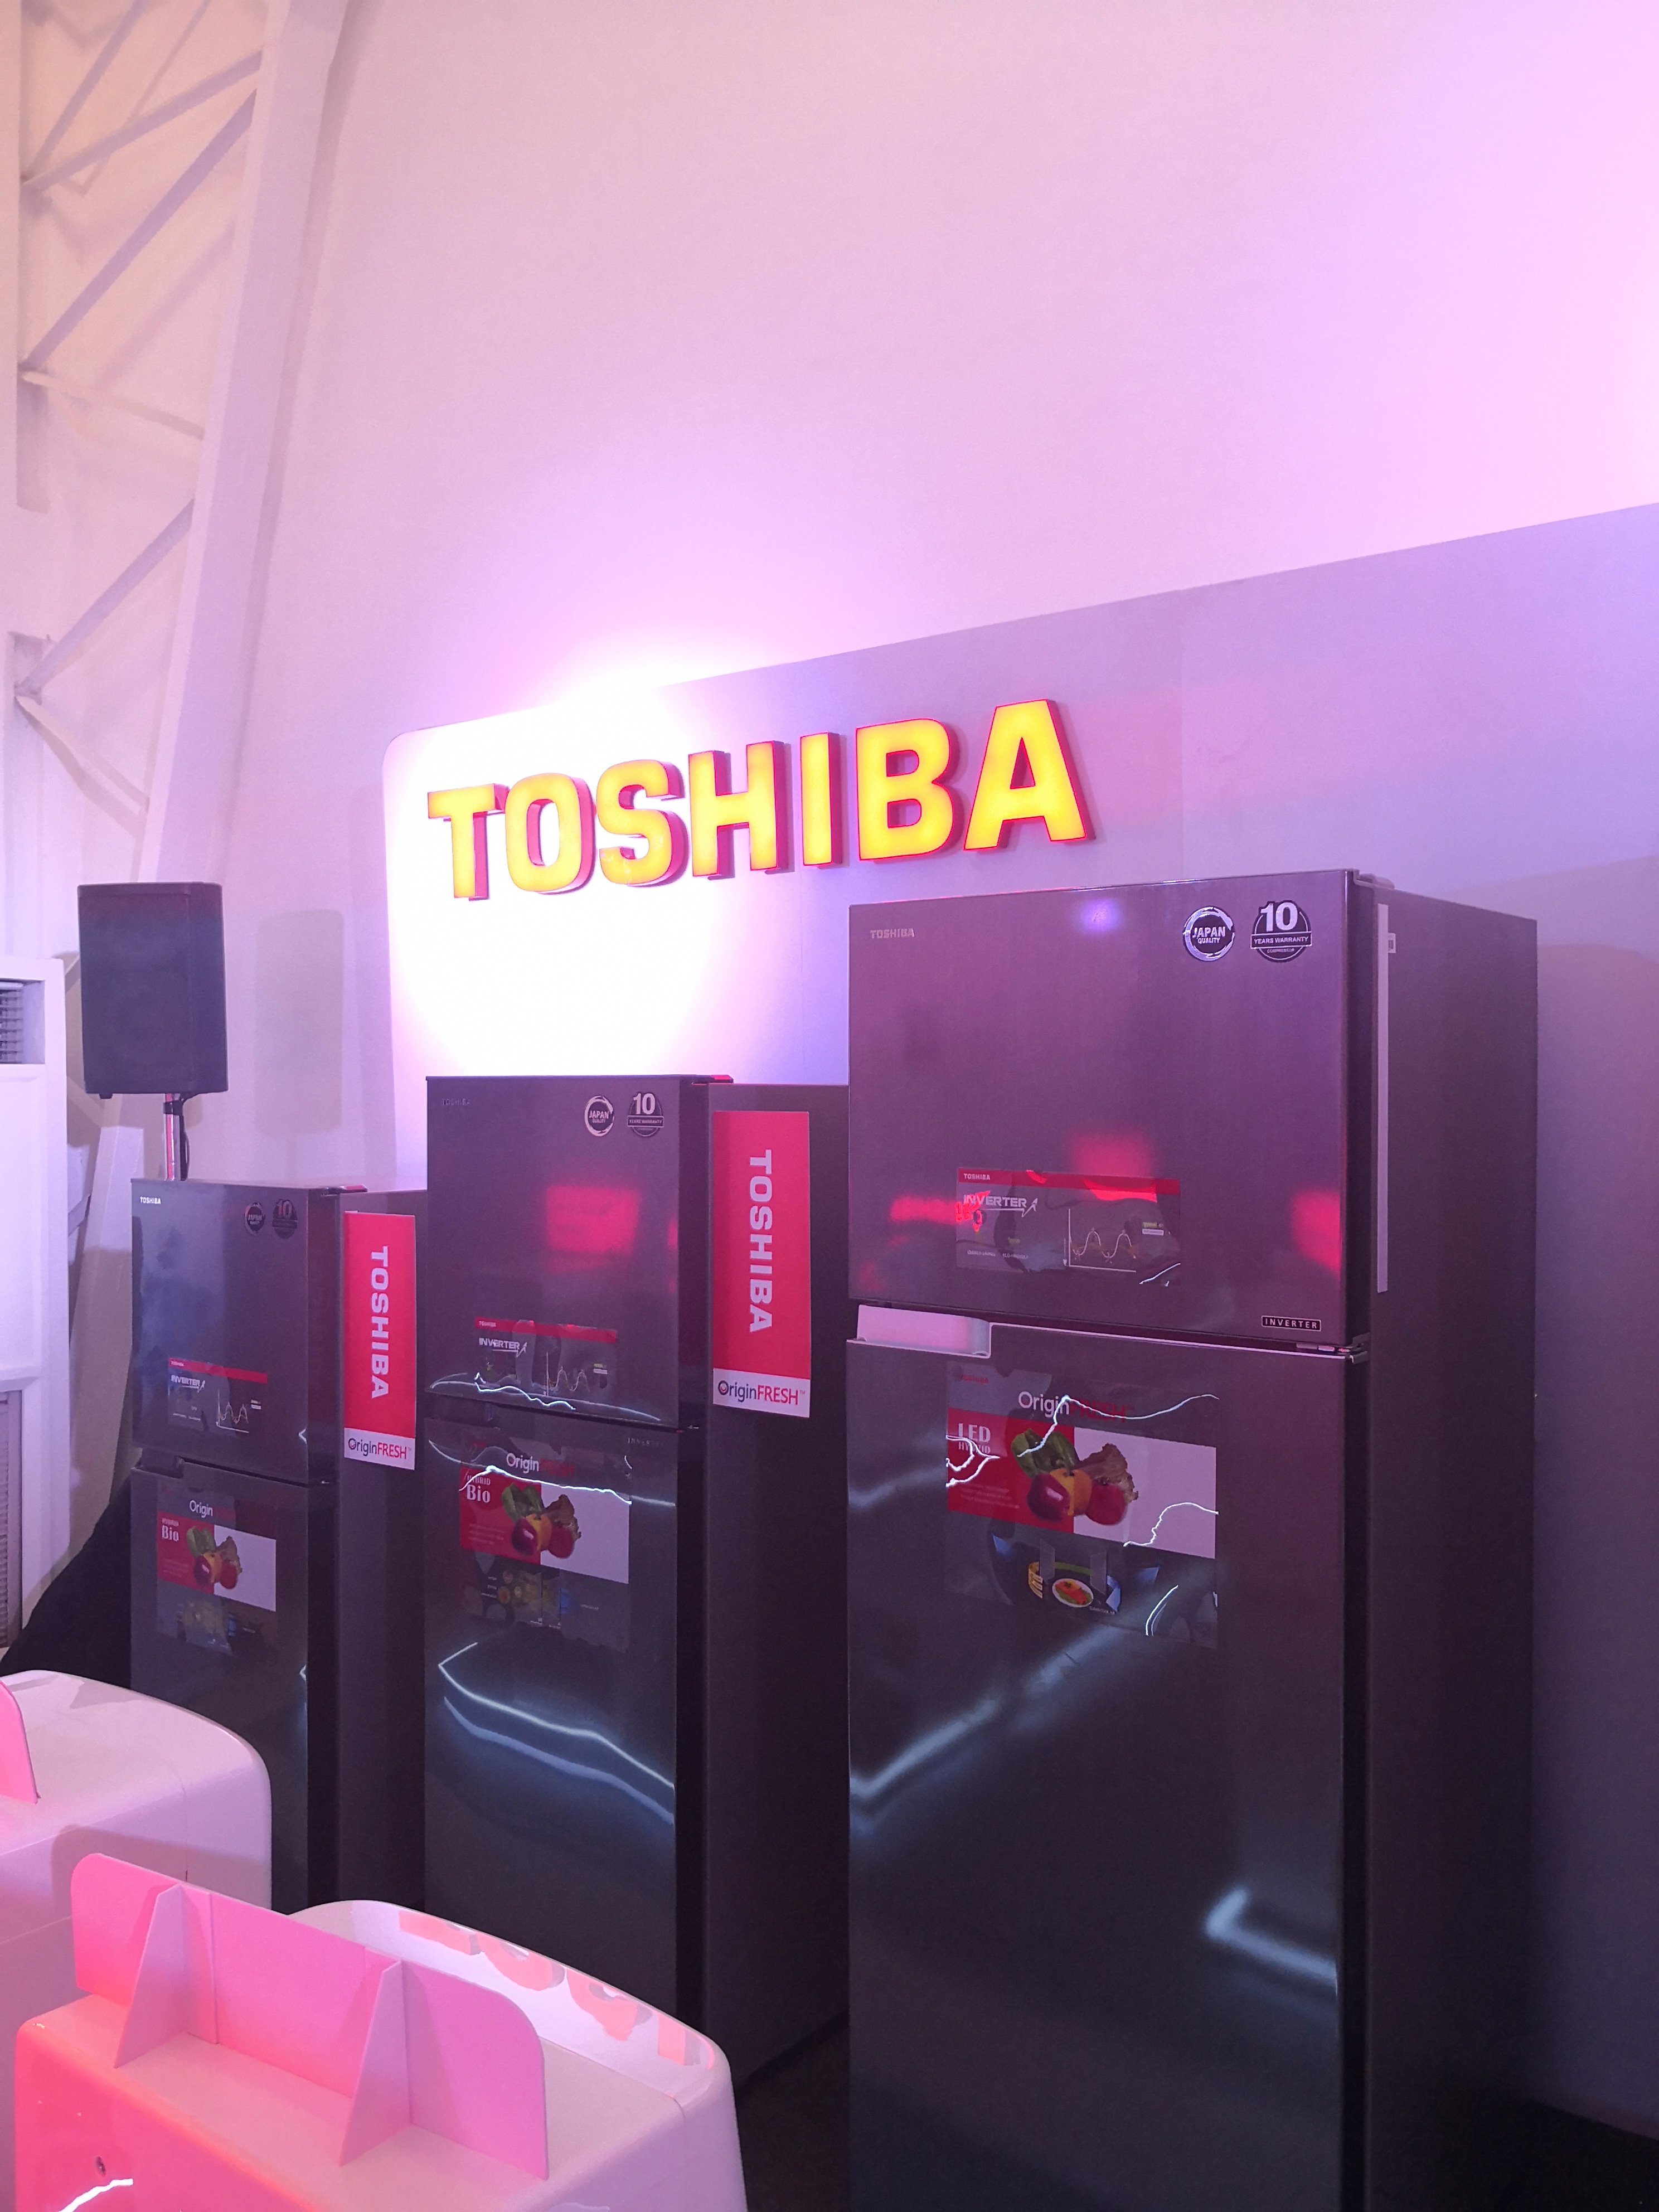 Toshiba’s latest line of home appliances has arrived in the Philippines